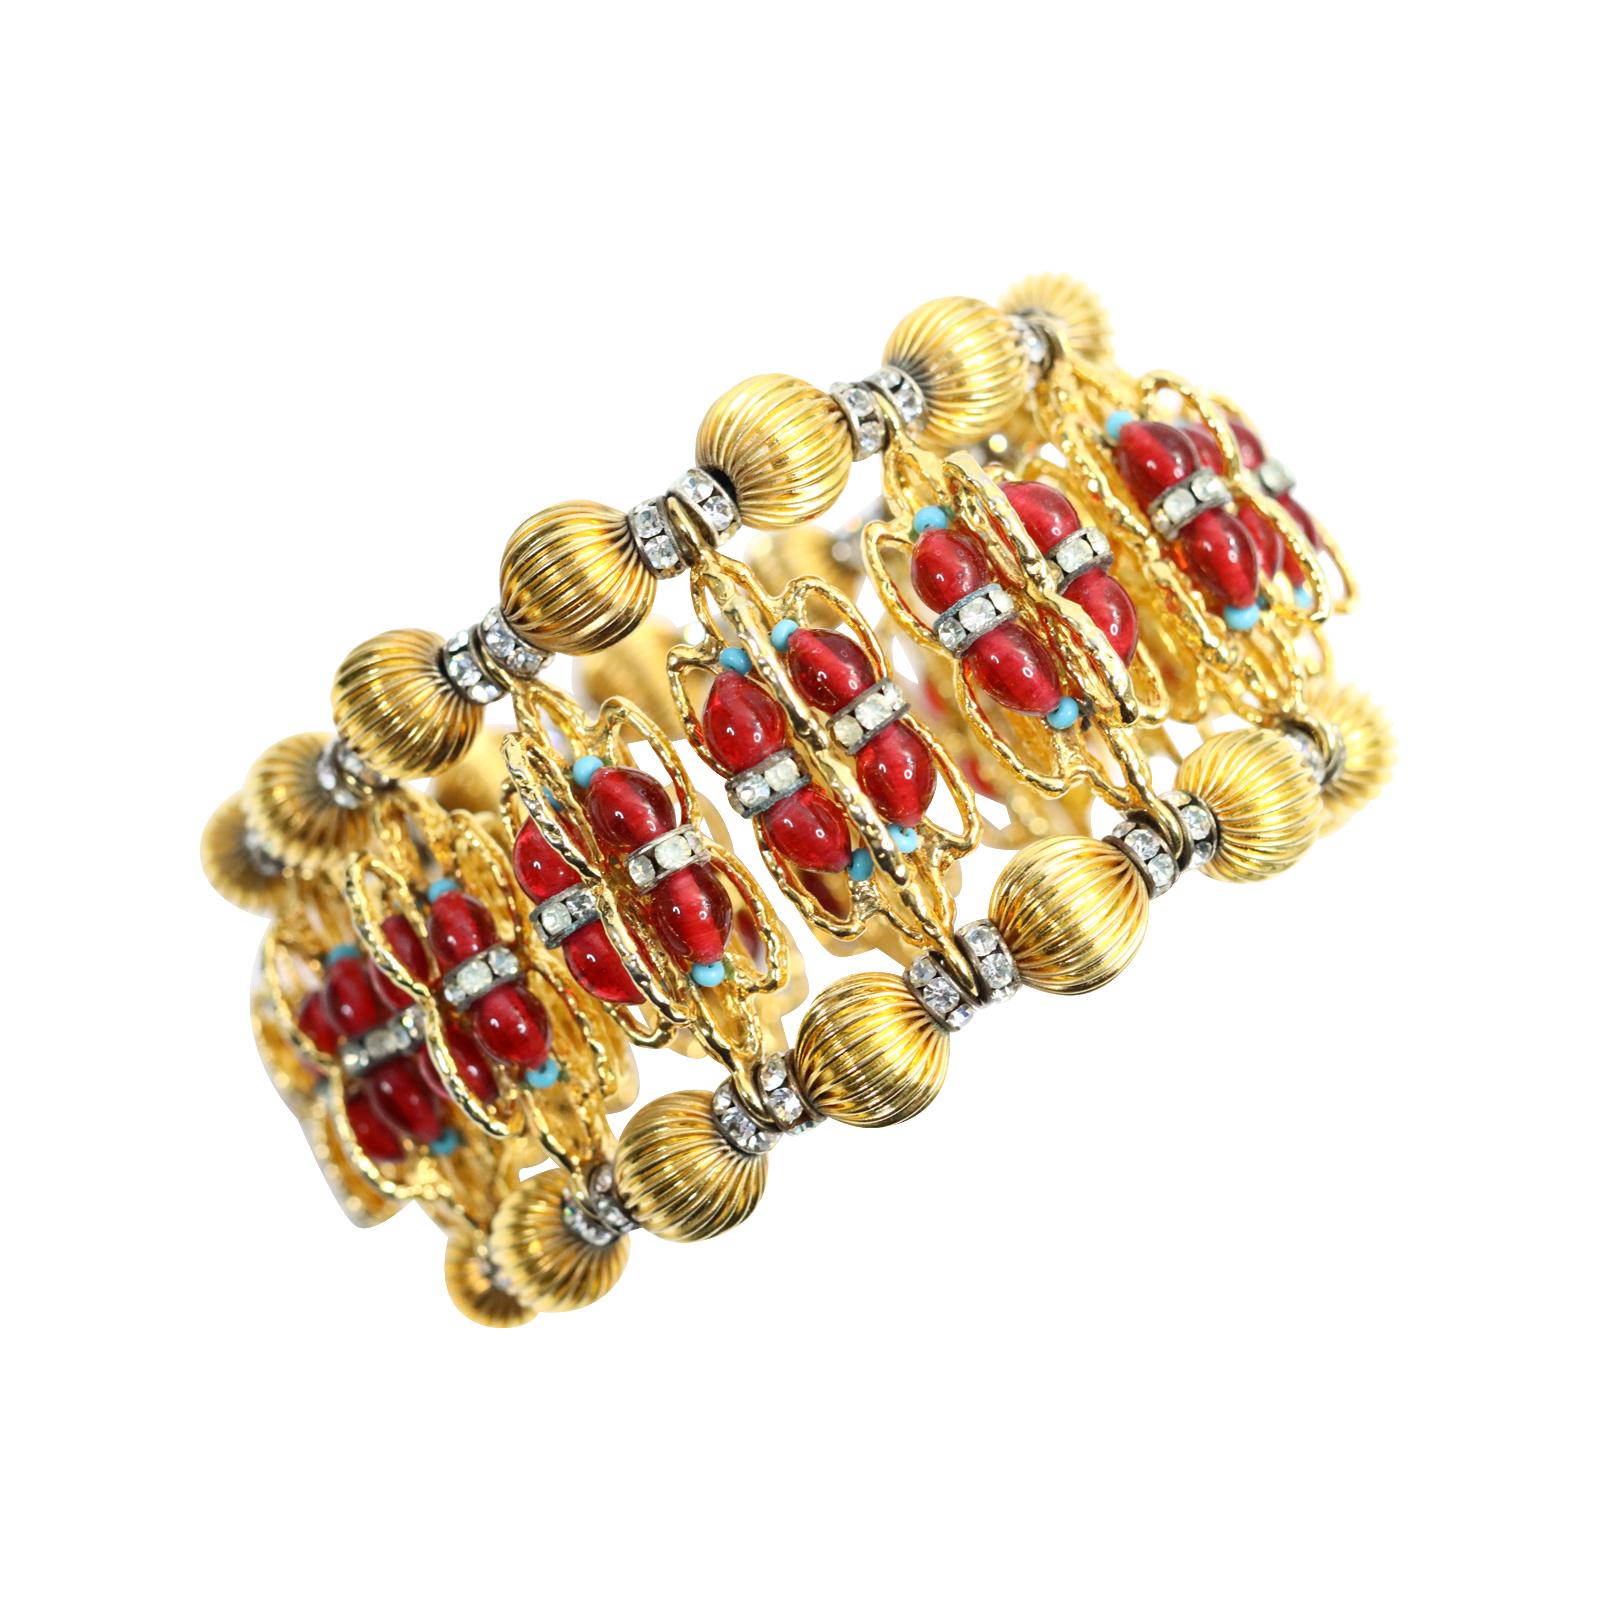 Vintage Delillo Bracelet with Red Cabochons Crystals Faux Turquoise circa 1970s For Sale 2